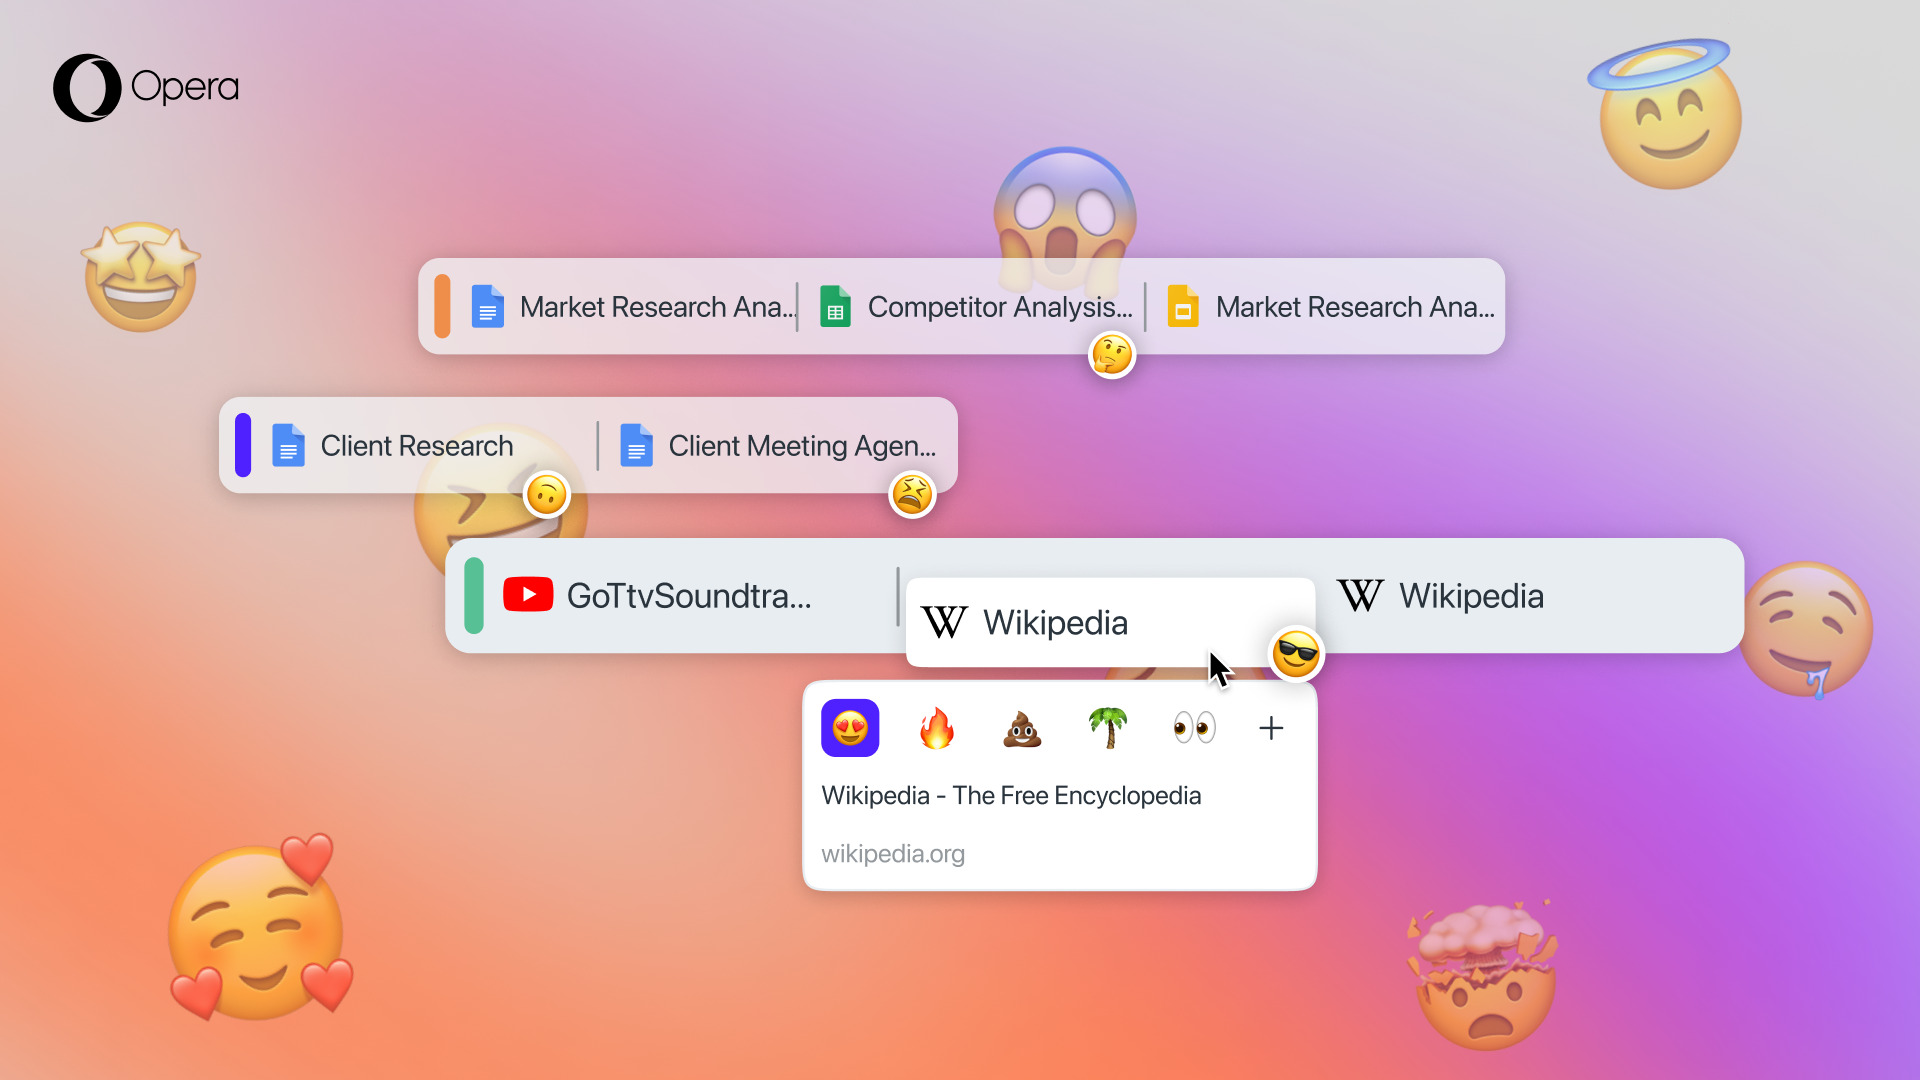 You can now decorate your tabs with Emojis in Opera